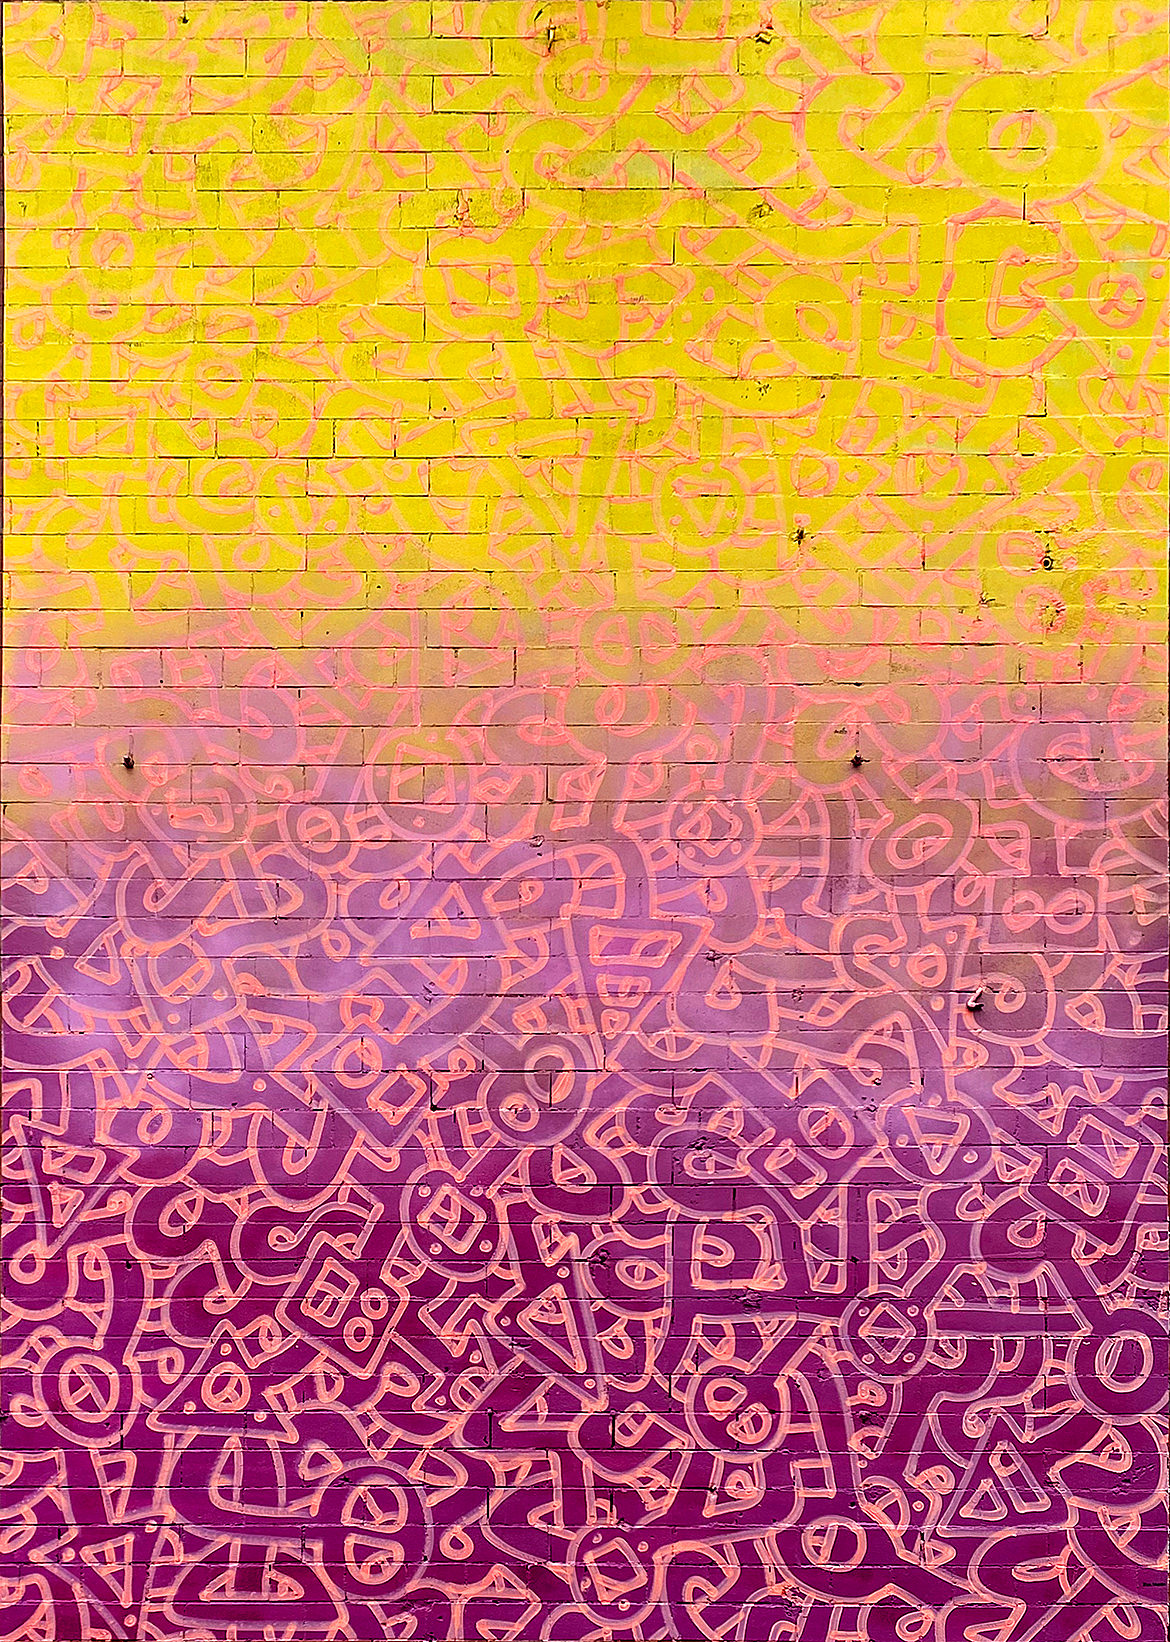 A mural with a background of yellow at the top fading to purple at the bottom and intricate interlocking shapes painted within